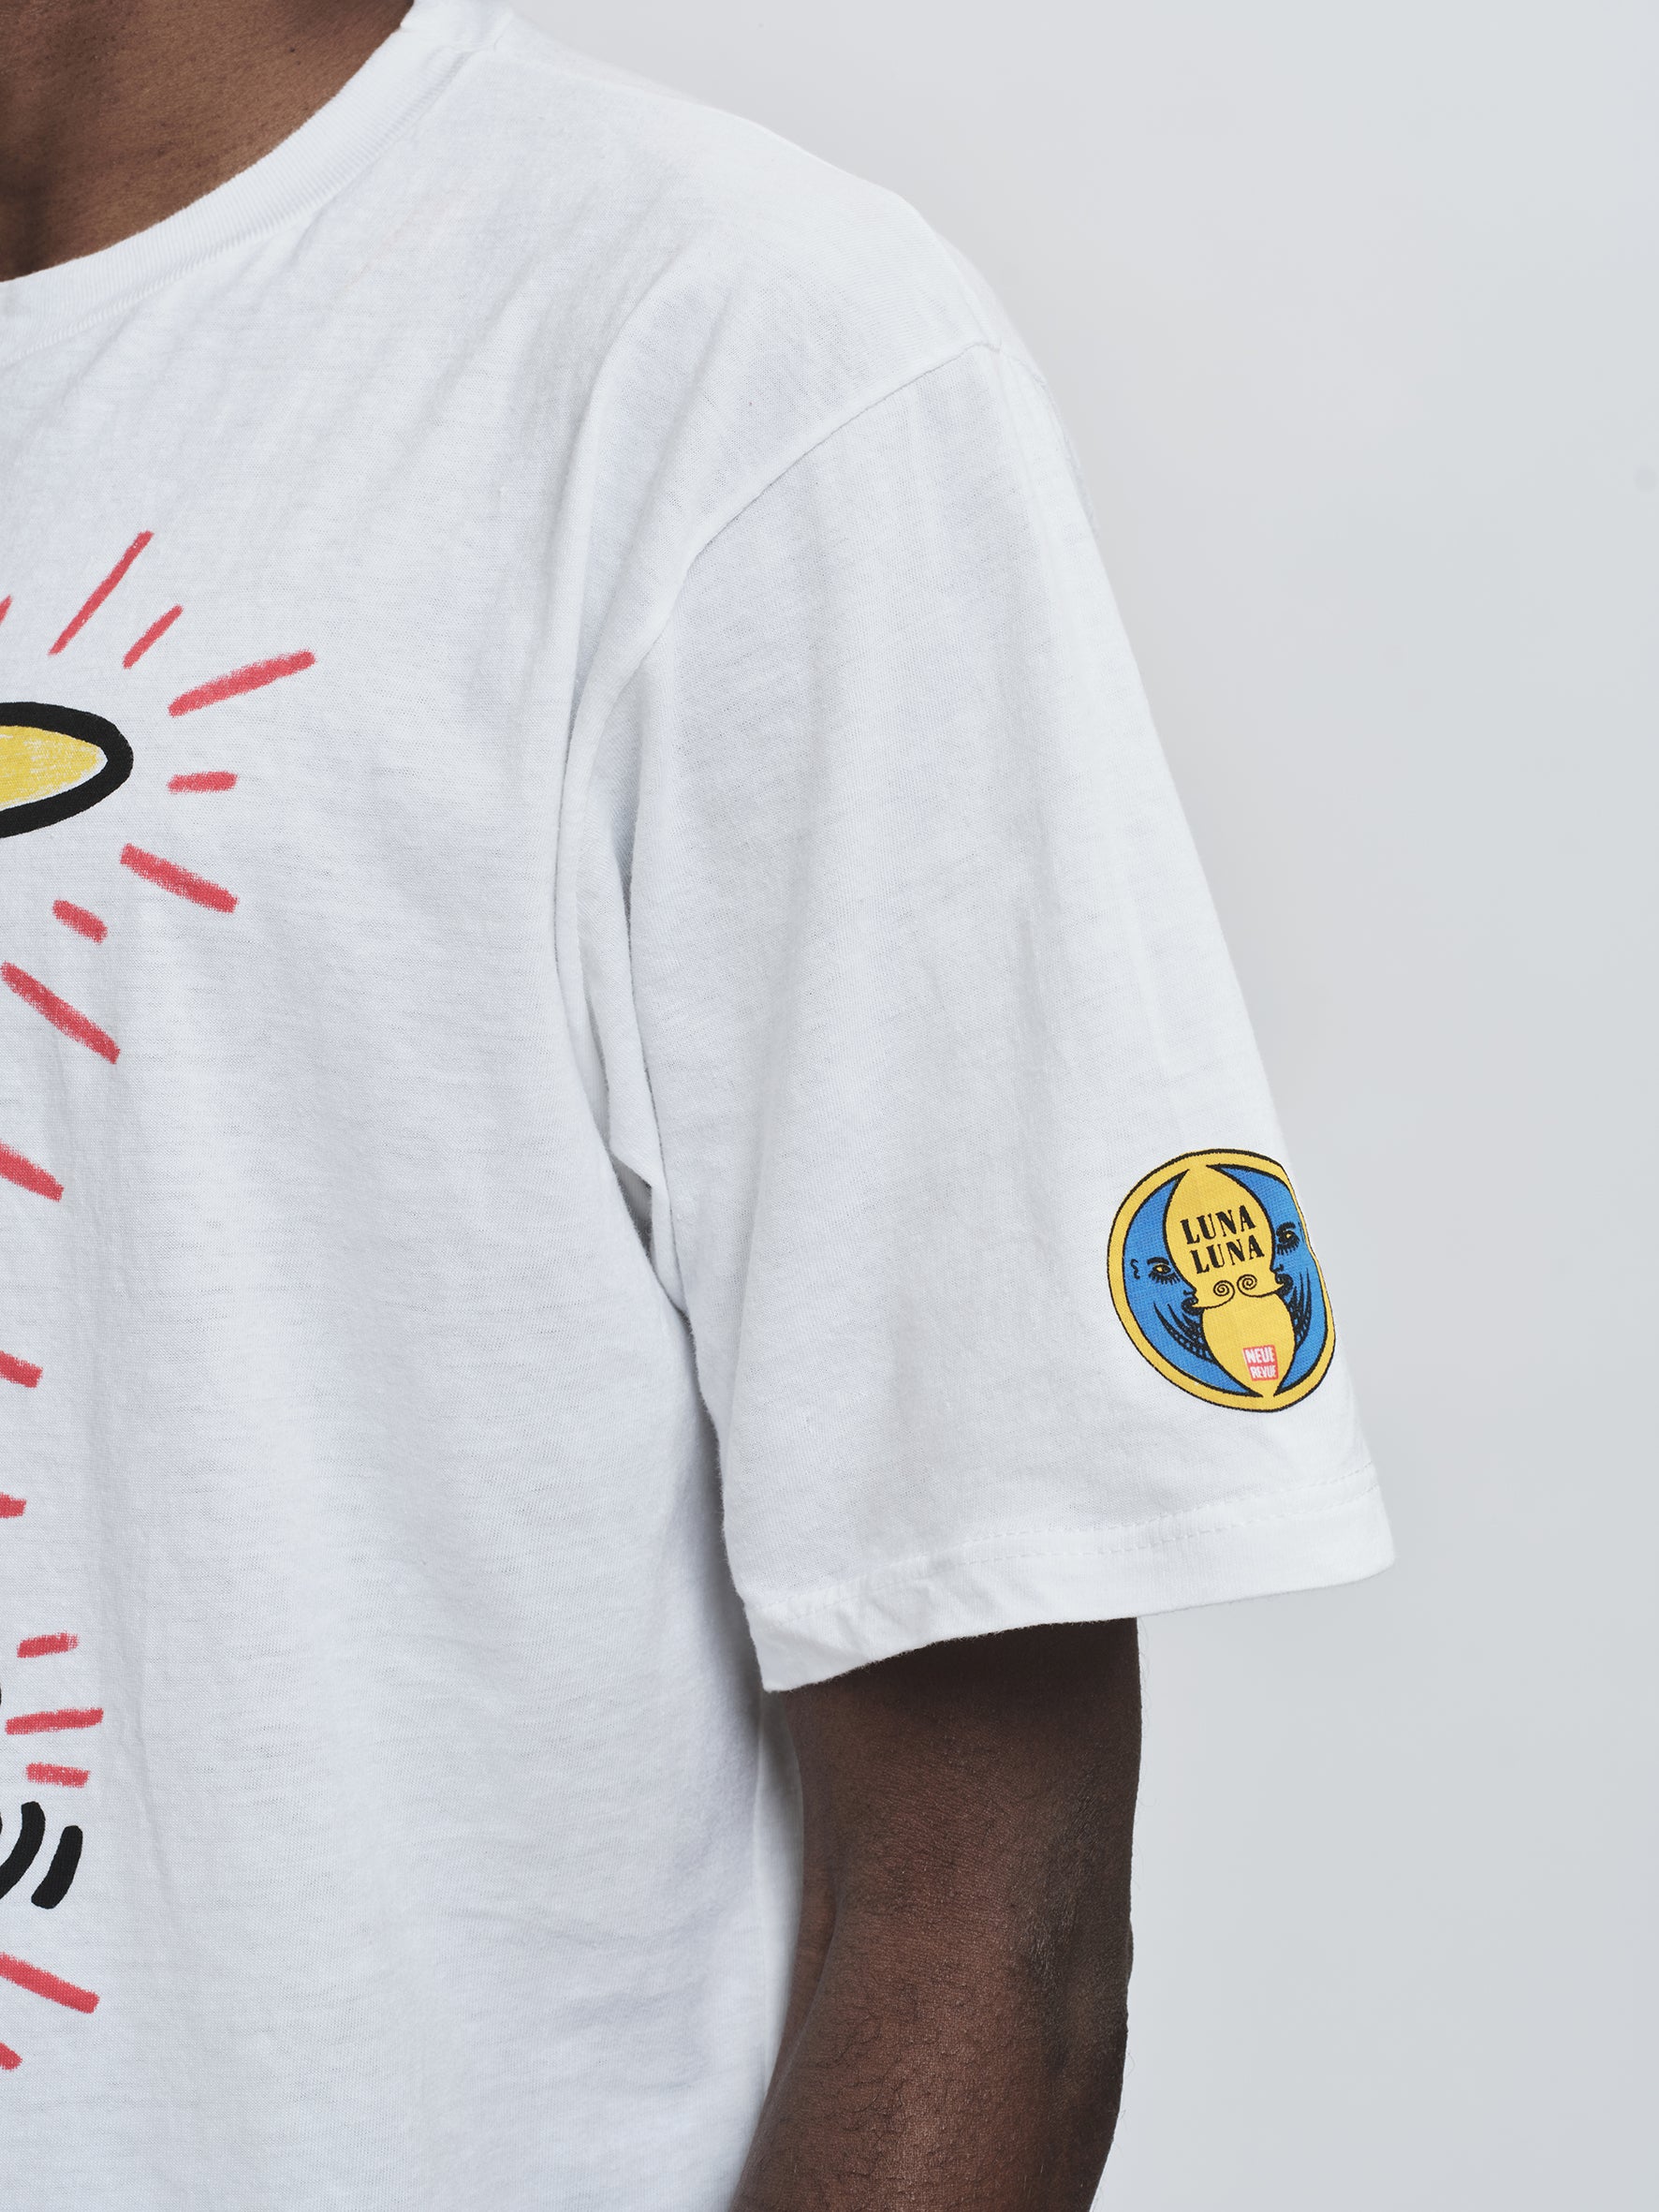 Archival Regular Fit Keith Haring T-Shirt detail photo